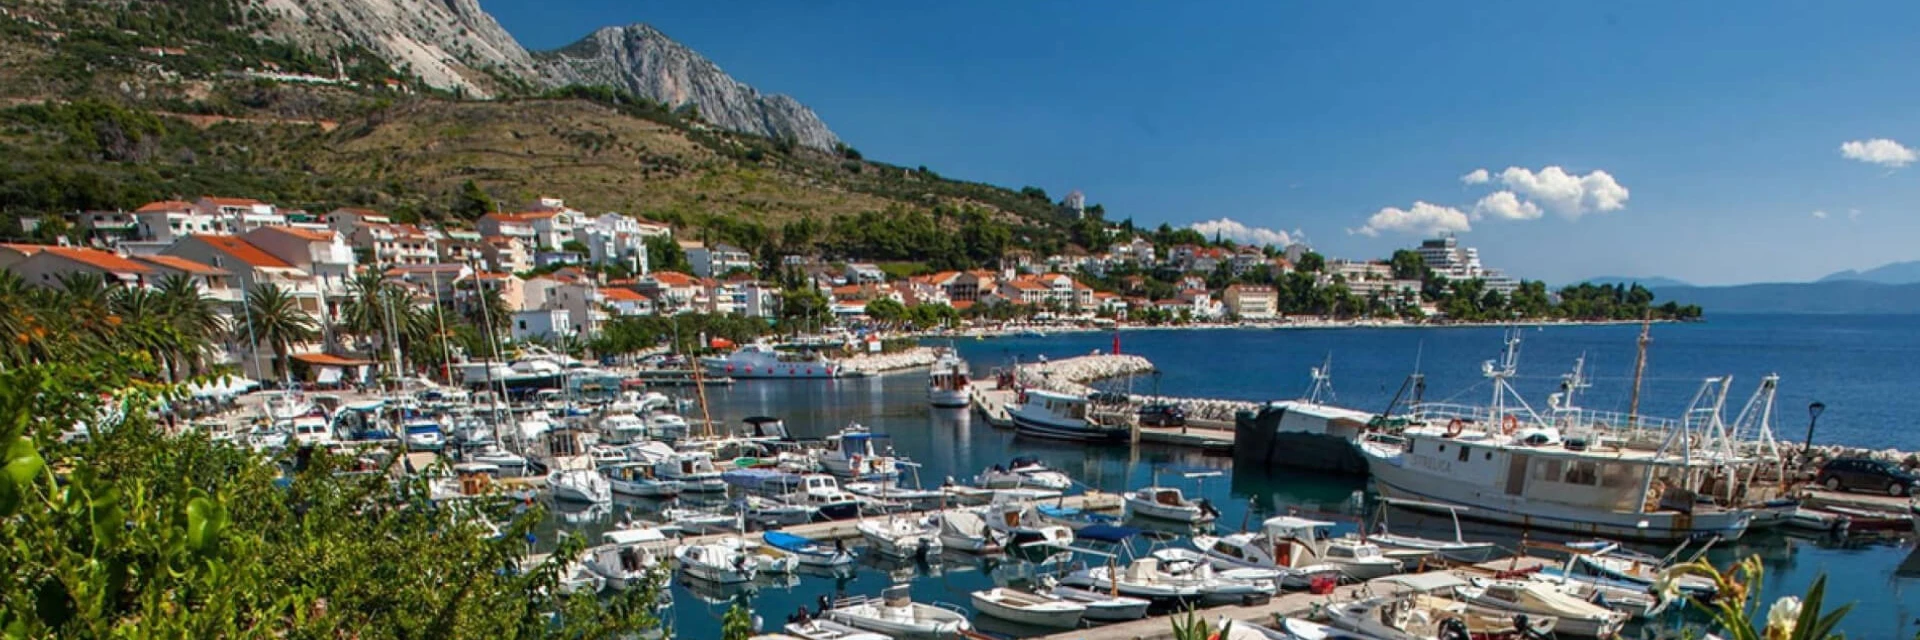 Things to see and do in Makarska Riviera